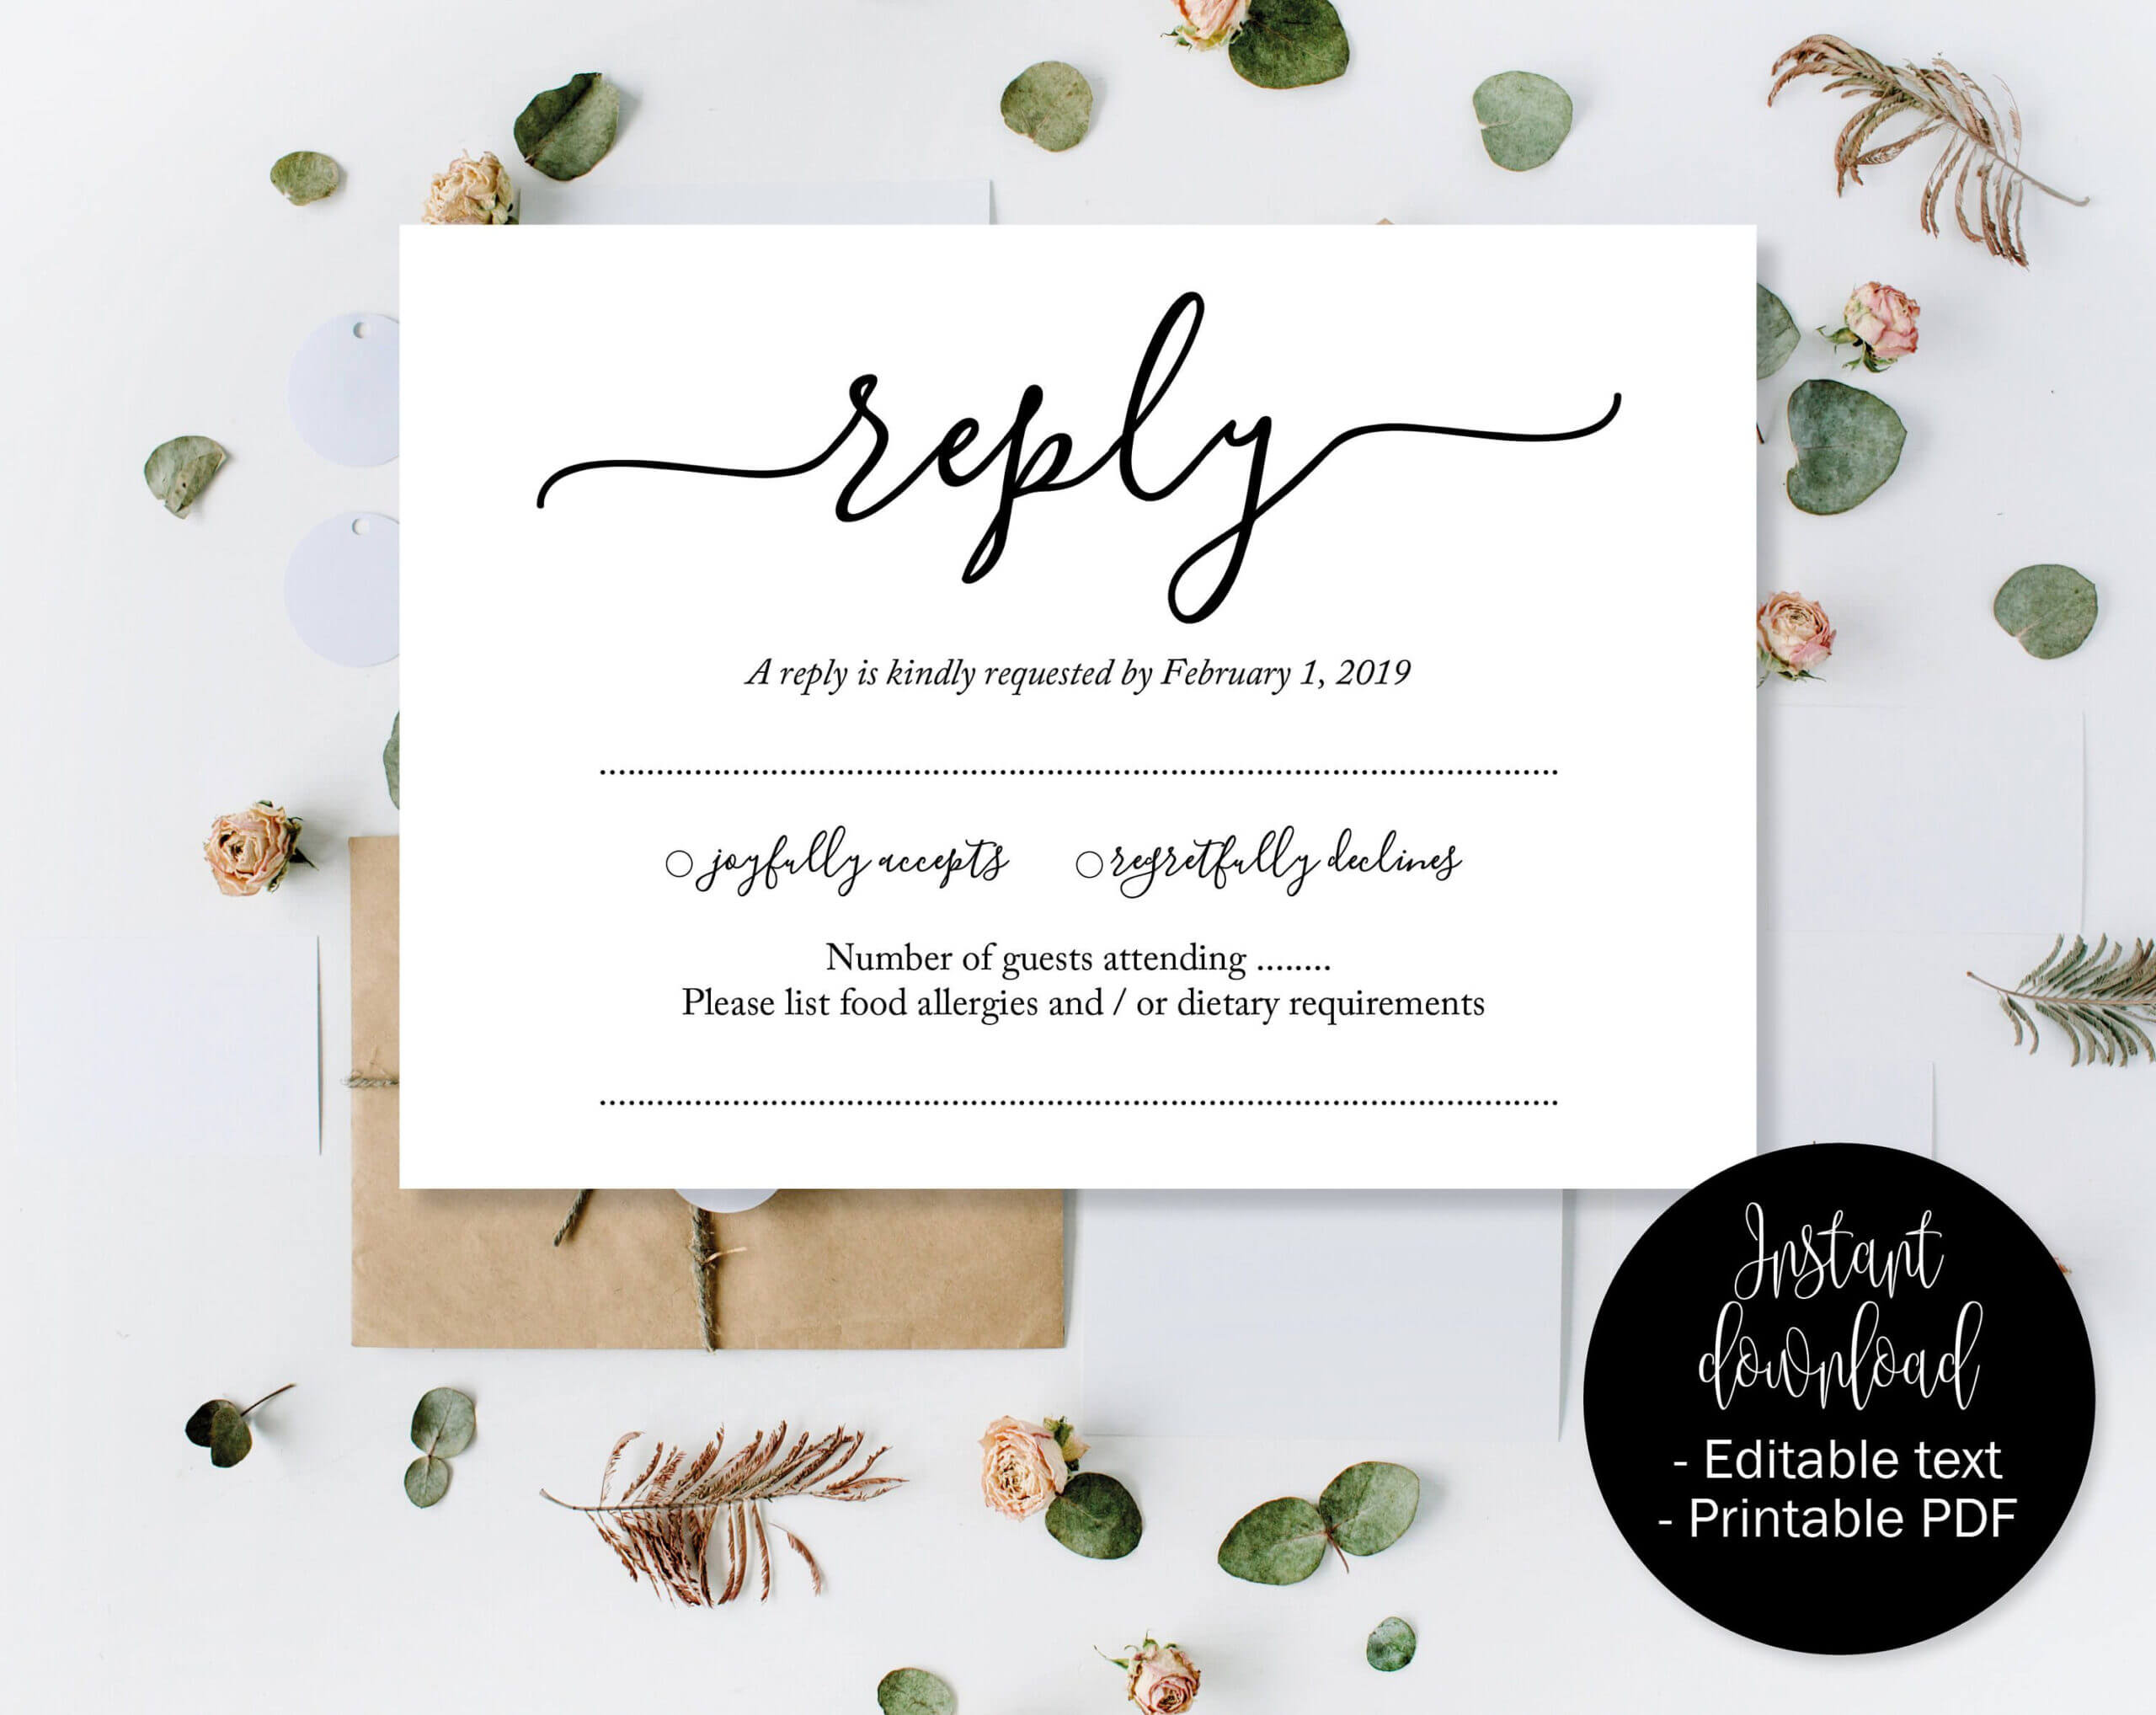 Wedding Rsvp Cards, Wedding Reply Attendance Acceptance For Death Anniversary Cards Templates